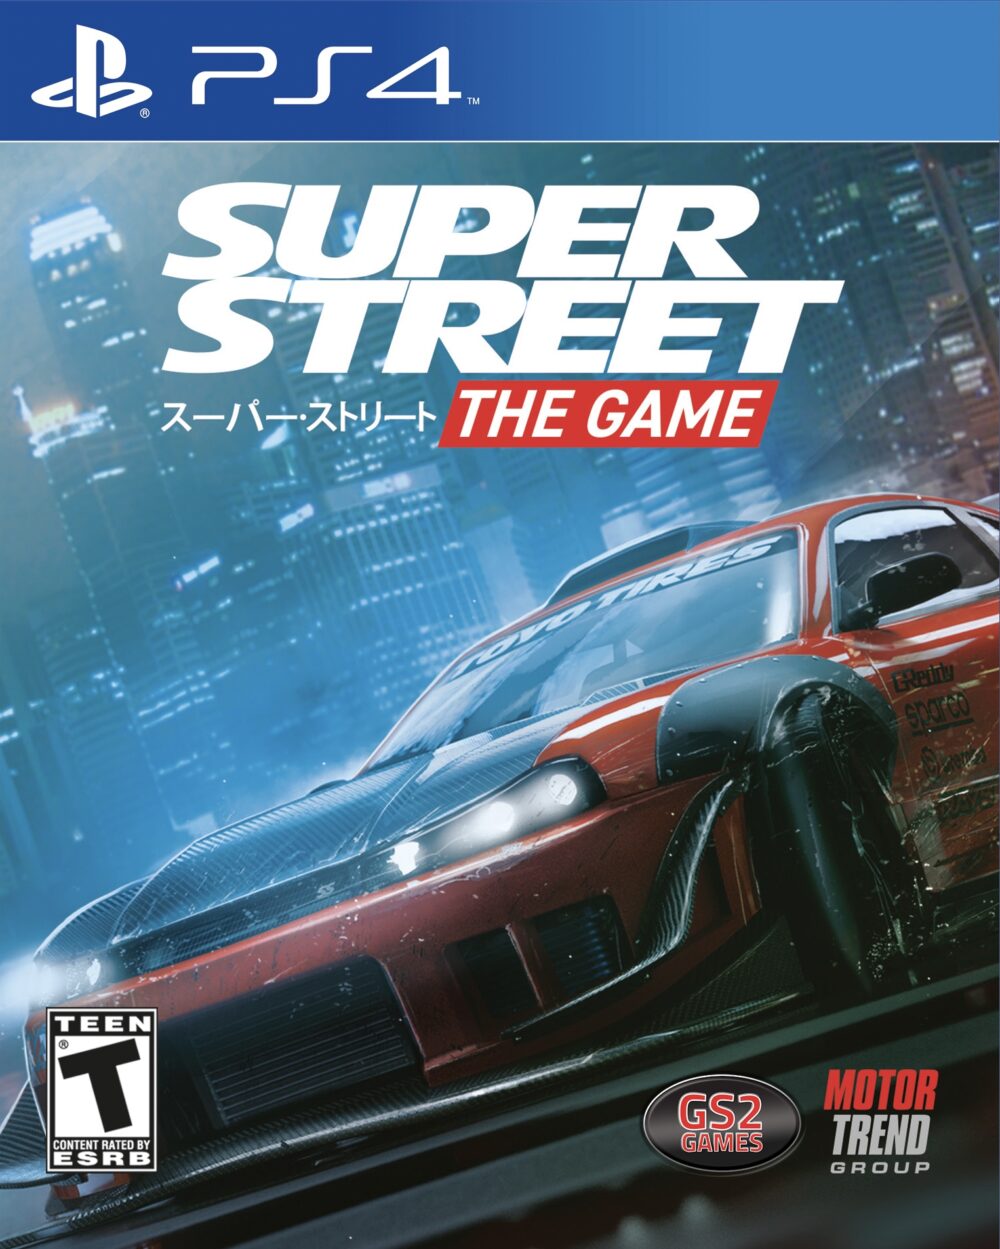 Super Street: The Game for PS4